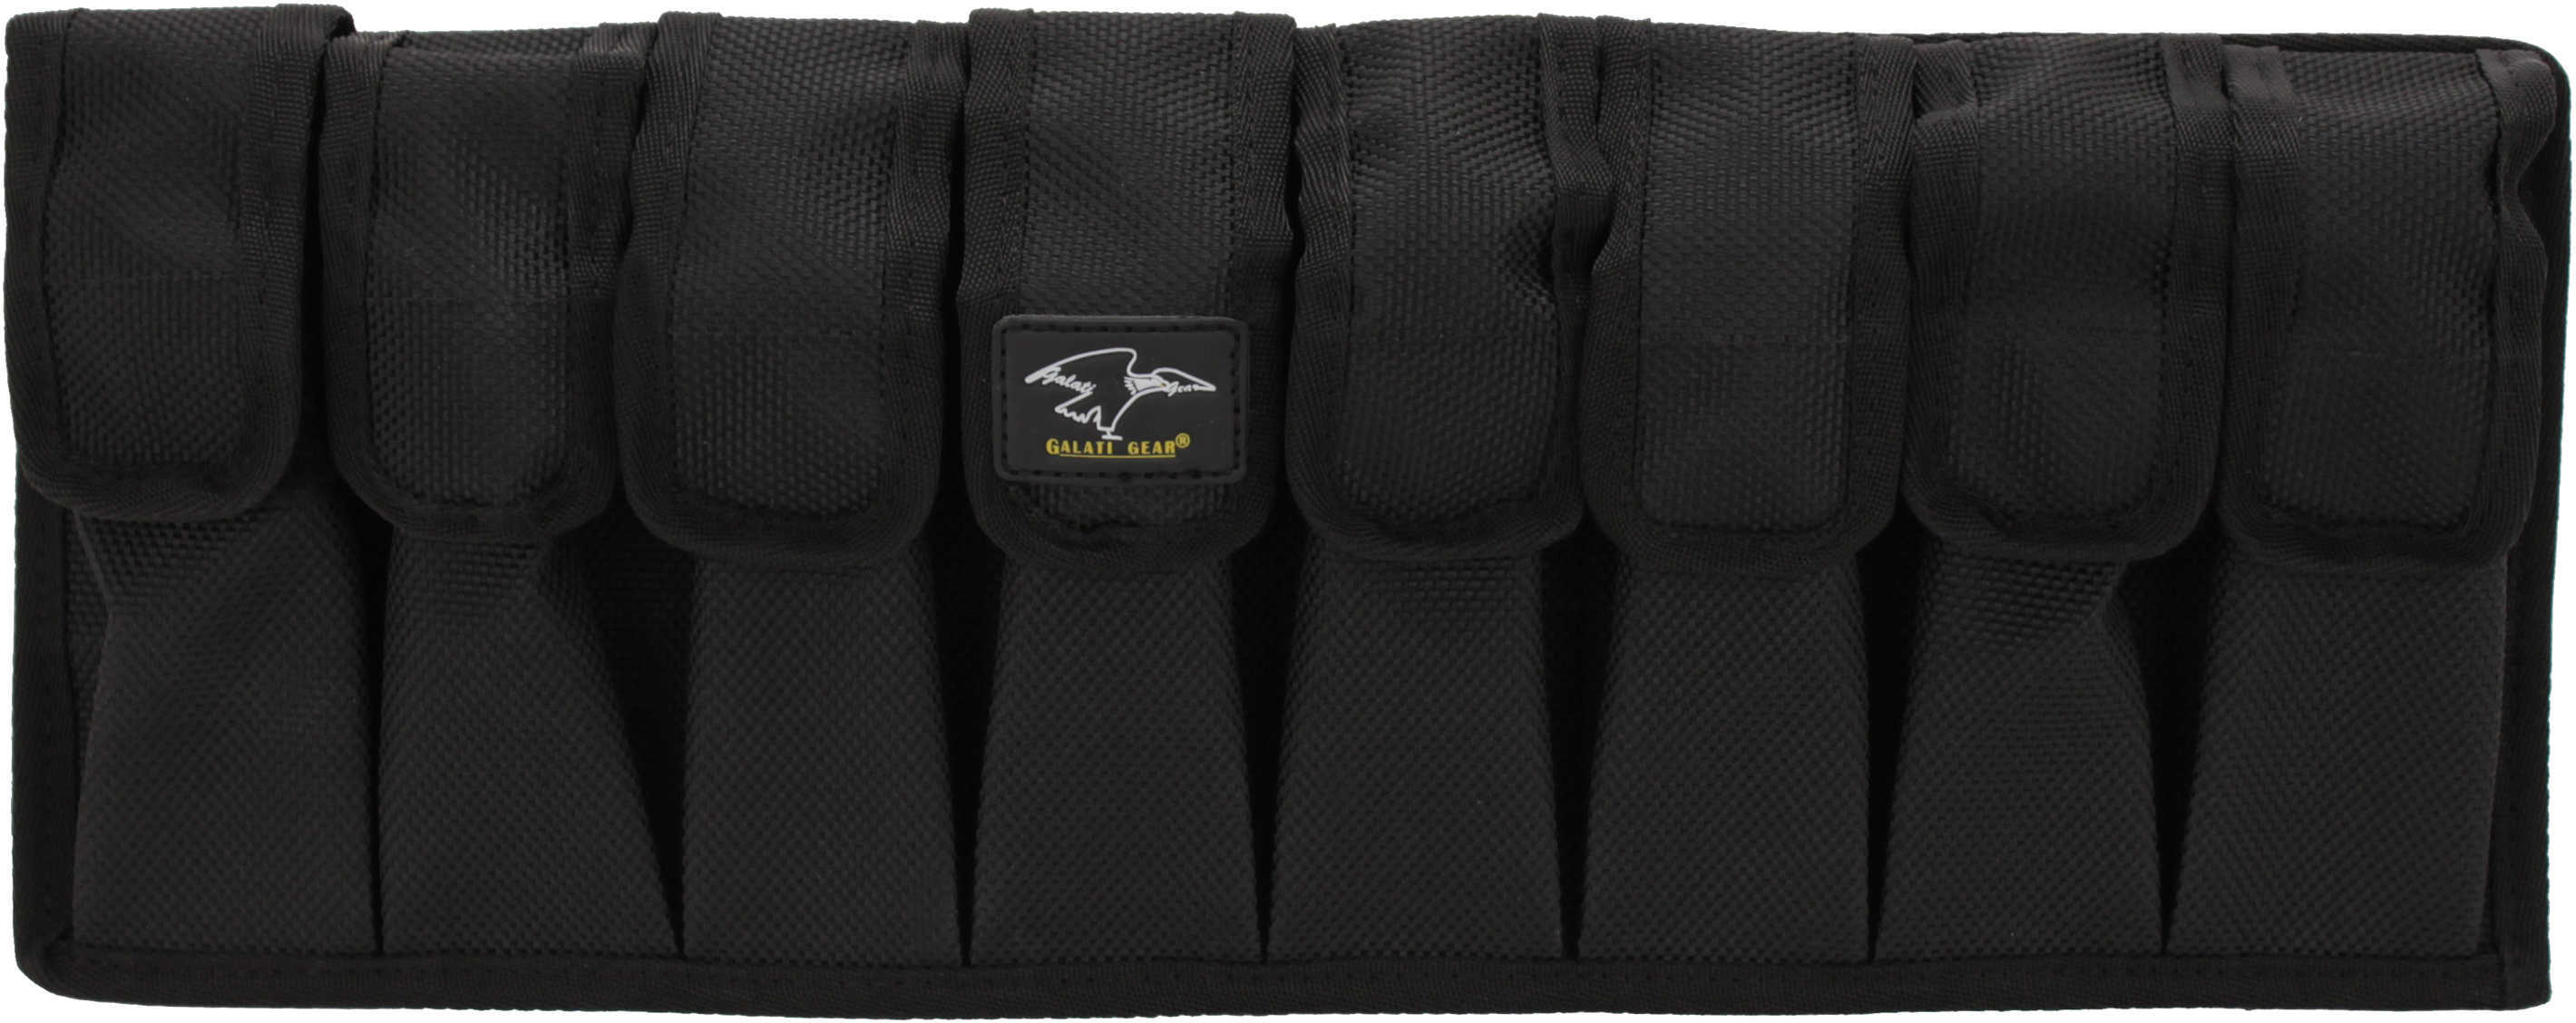 Galati Gear Mag Pouch Eight Pack with Velcro and Molle GLMP8VM